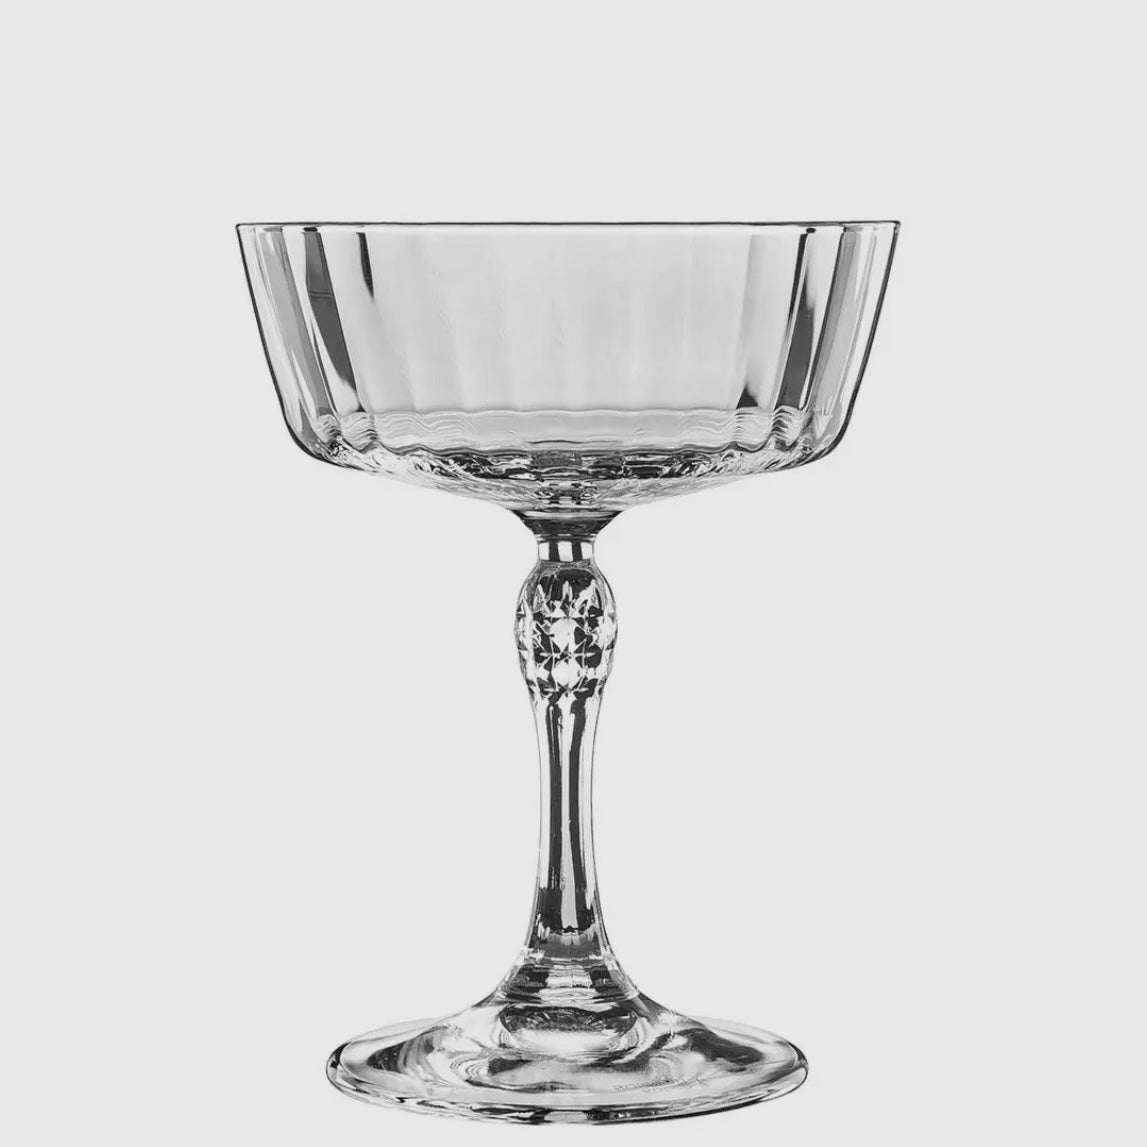 ART DECO STYLE CHAMPAGNE COUPE